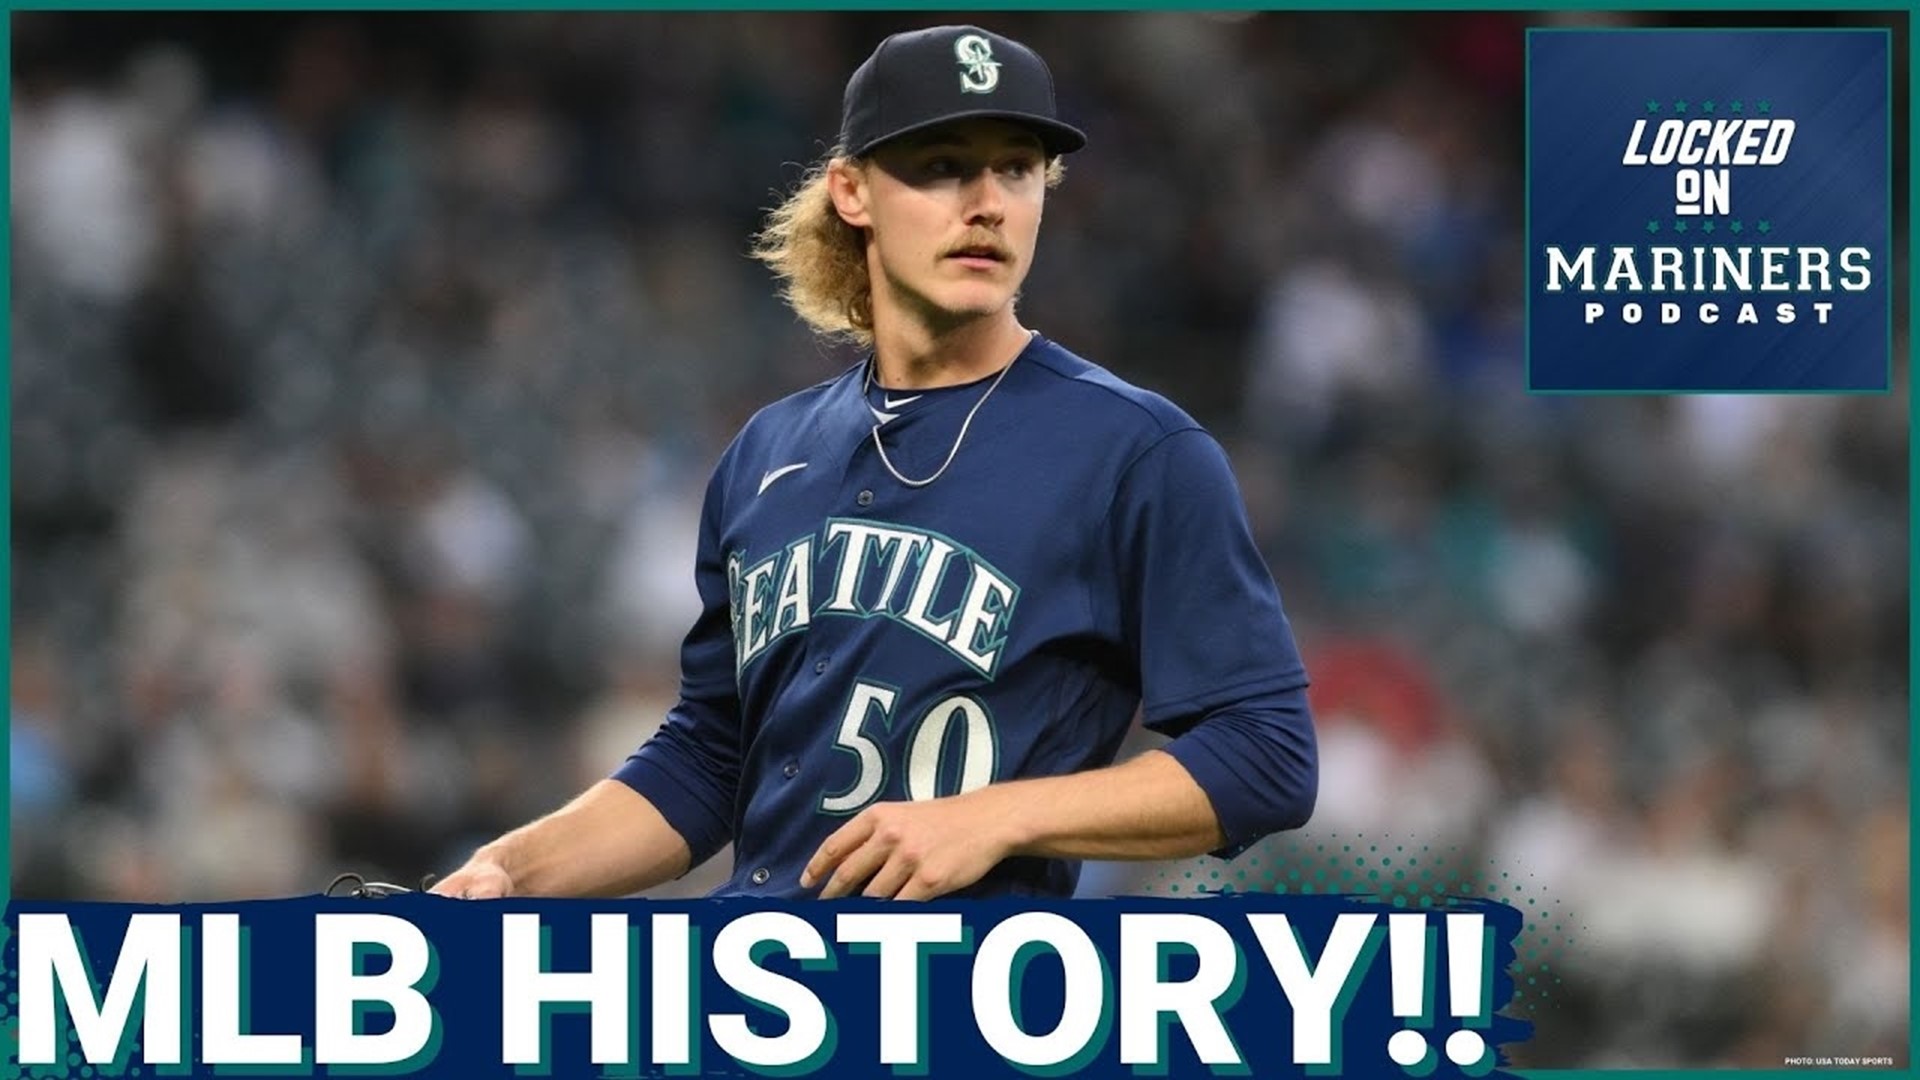 The historic start to Bryce Miller's major league career continued in a big way with a six-inning, scoreless outing in the Mariners' 6-1 win over the A's.